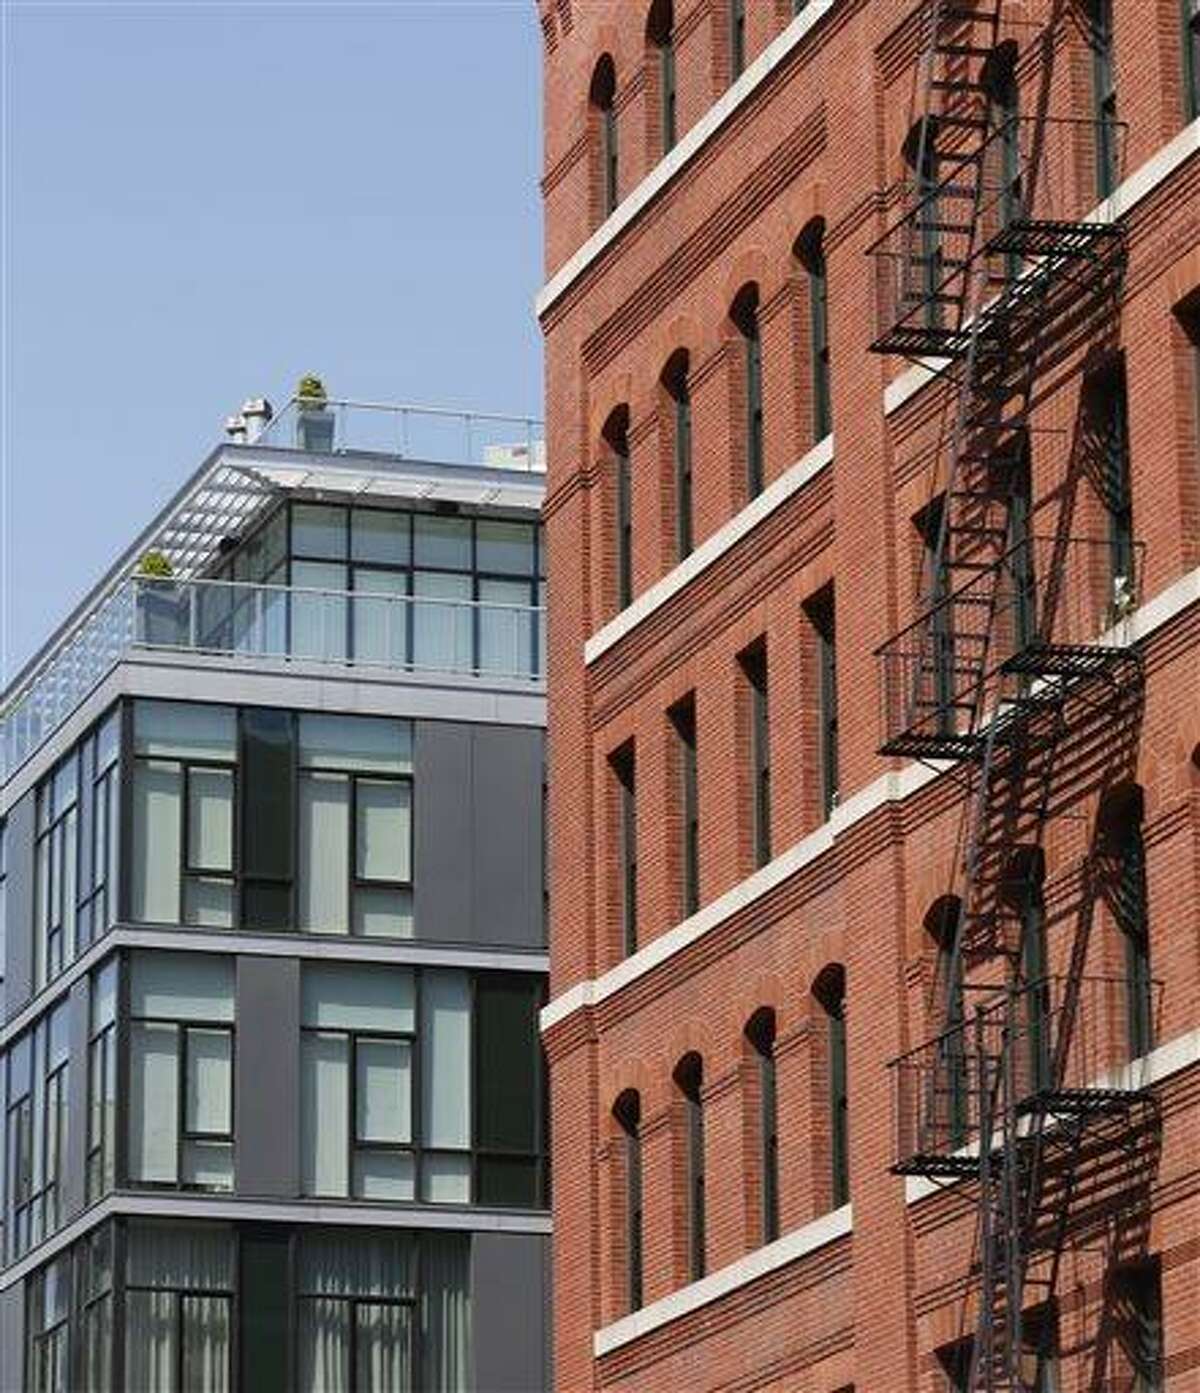 A modern luxury glass apartment building, left, sits across the street from an older red brick apartment, the home of photograher Arne Svenson, Thursday, May 16, 2013 in New York. Residents of a New York luxury apartment building are livid over an exhibition of photos secretly snapped through their apartment windows. (AP Photo/Bebeto Matthews)